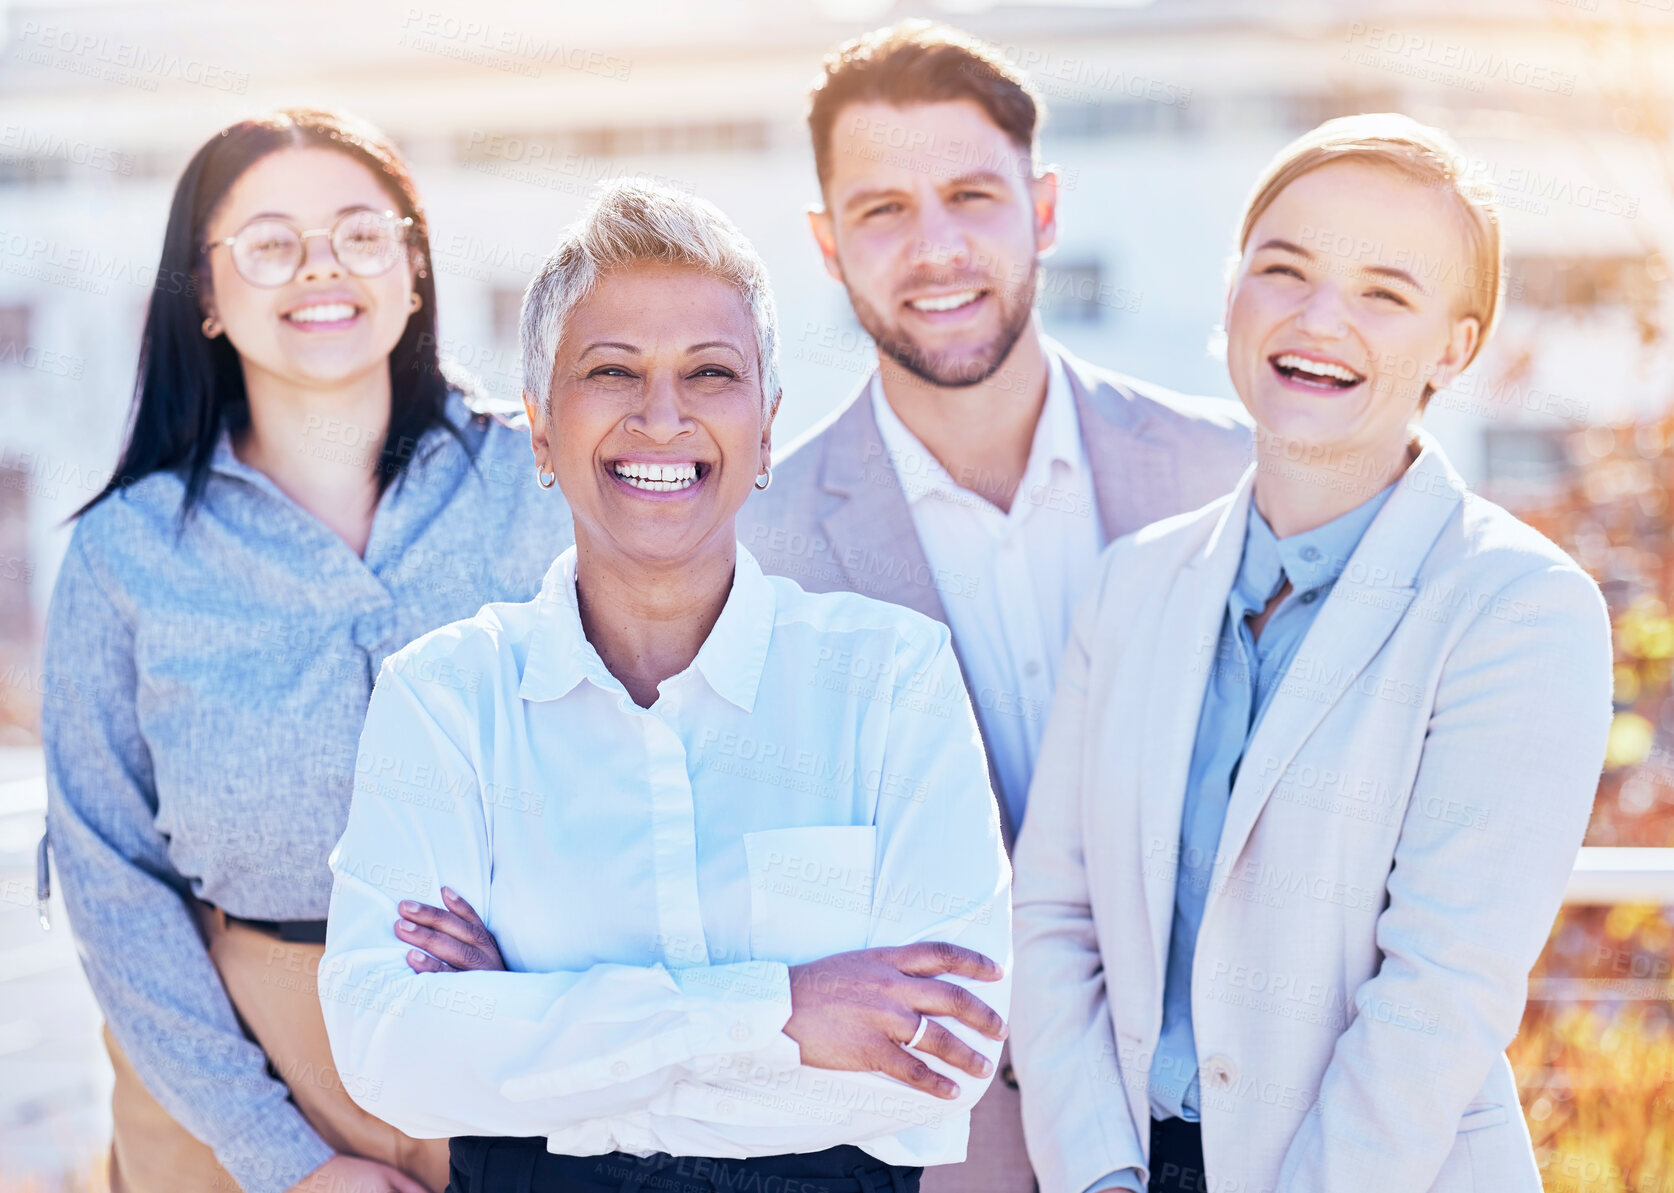 Buy stock photo Smile, portrait of business people and team building outside office with happy employees at creative start up. Diversity, happiness and pride, man and women in outdoor picture together at workplace.